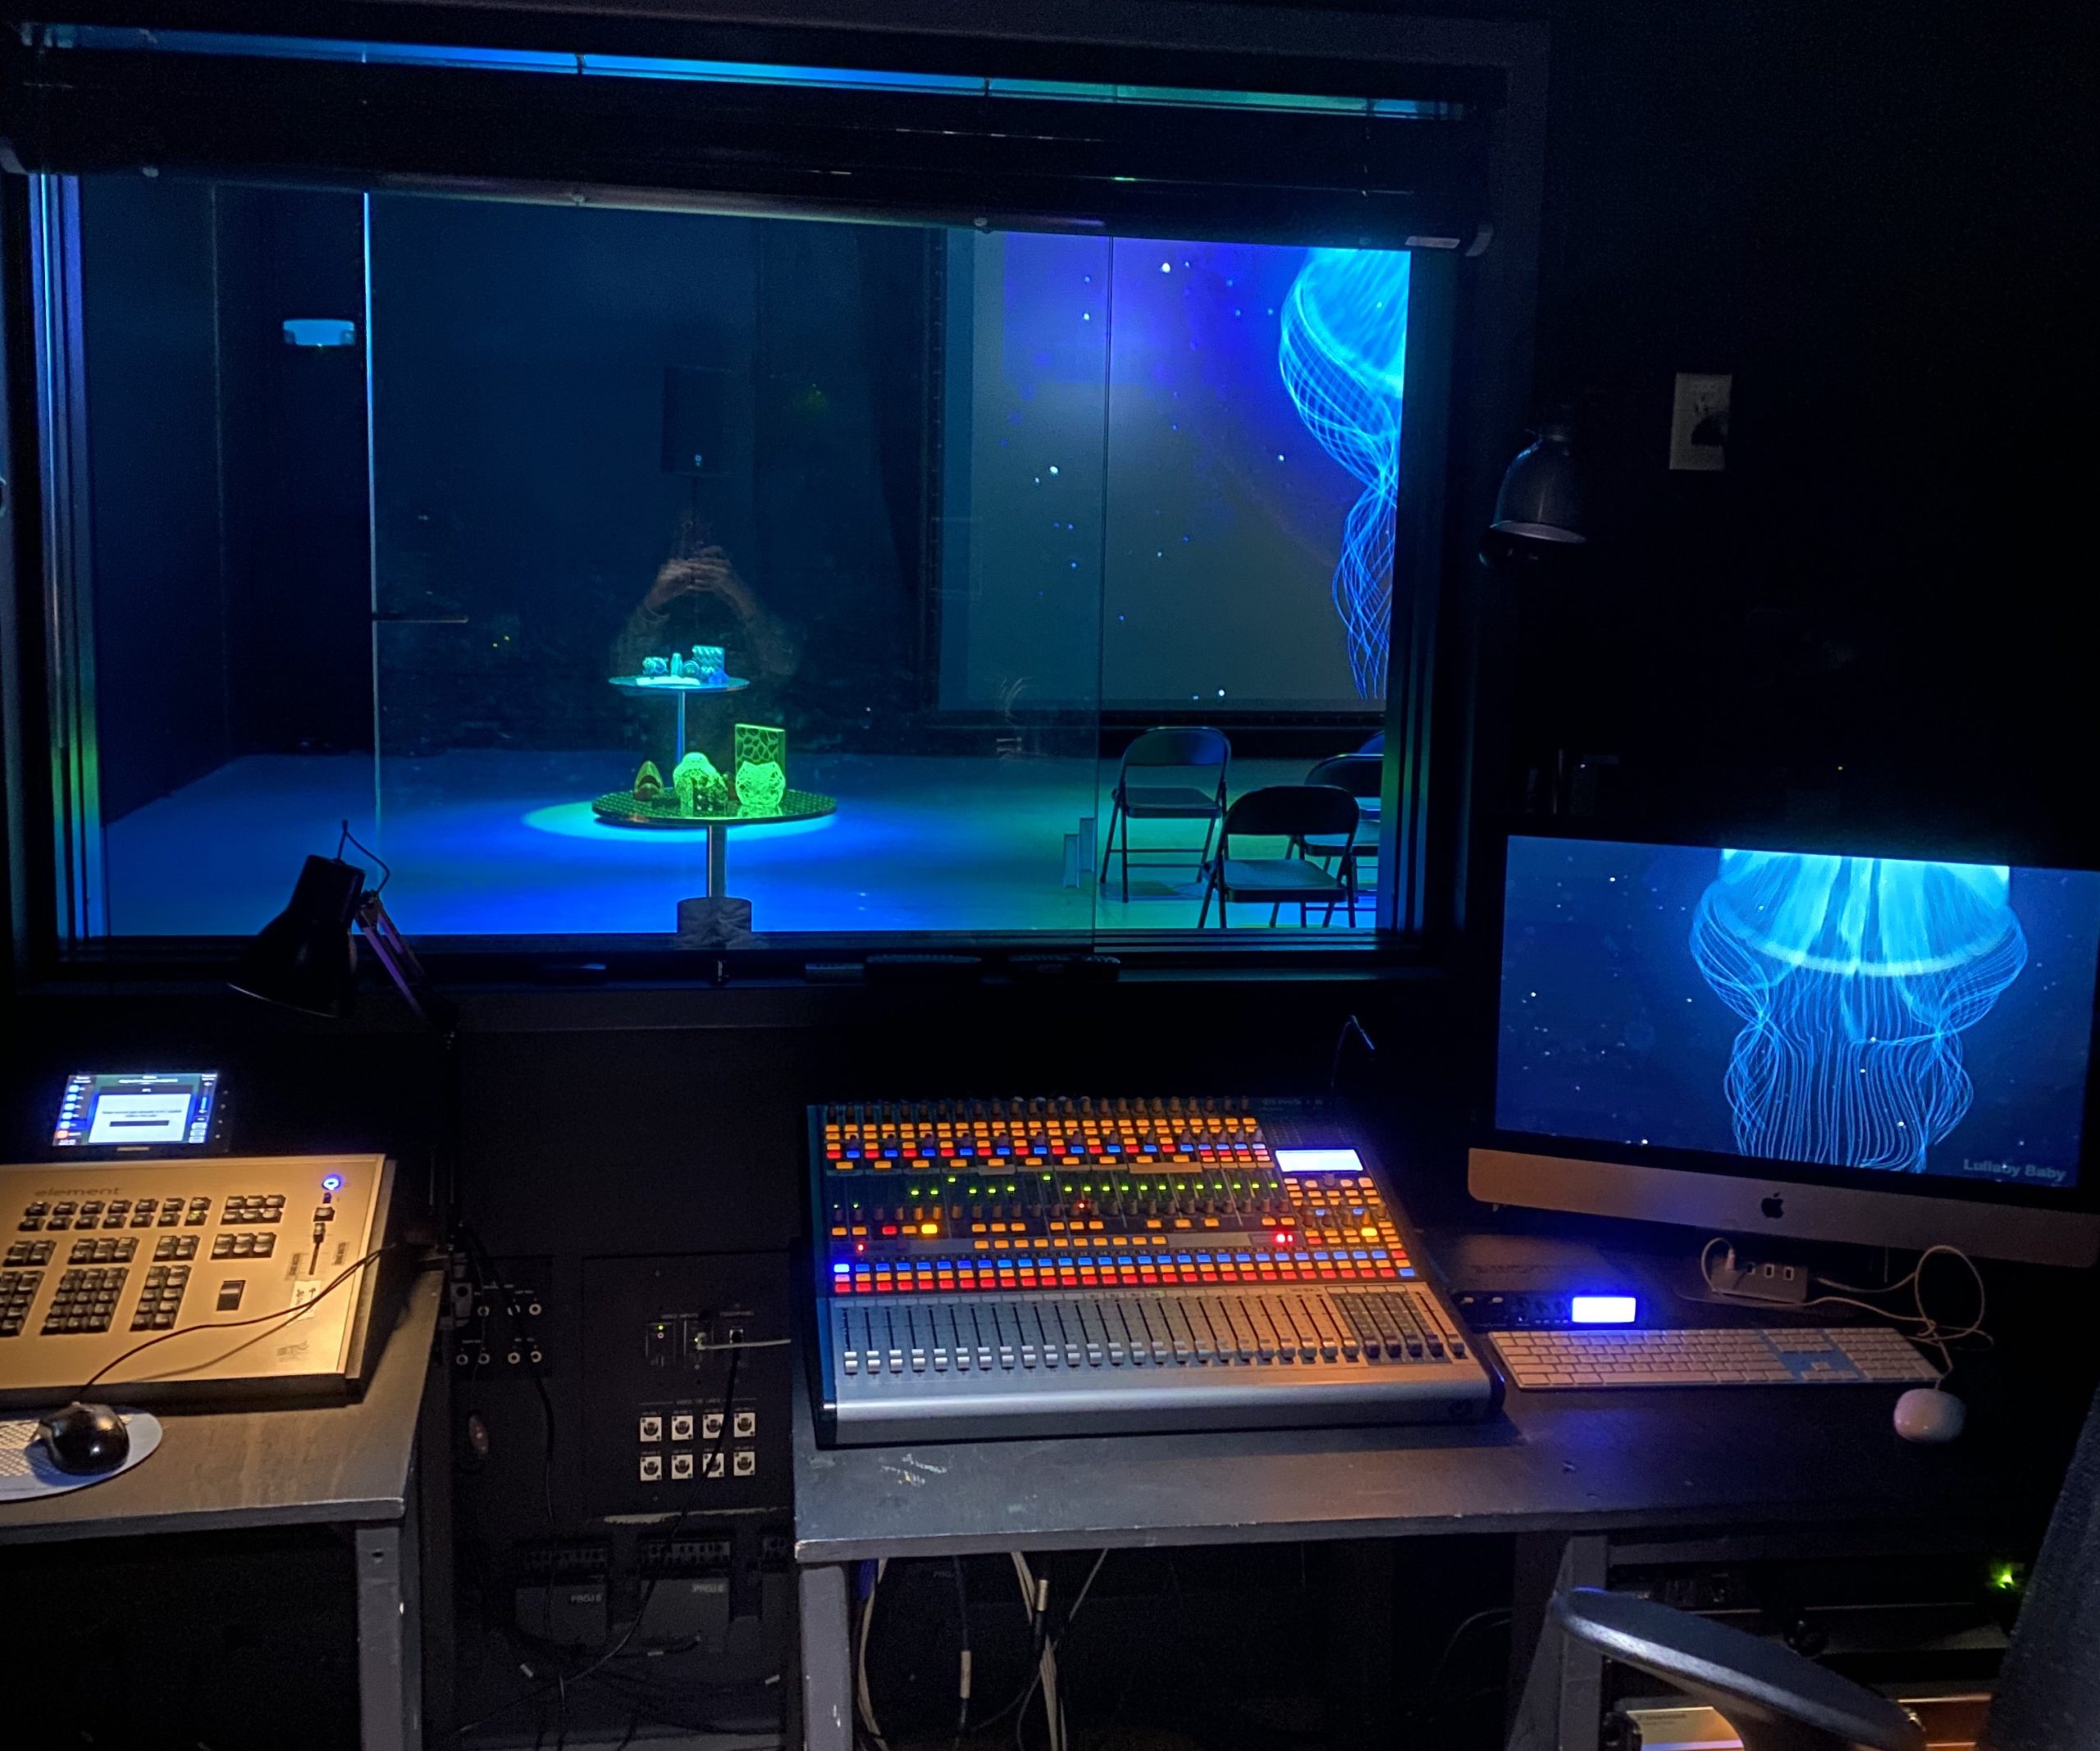 Green and blue theater lights shine on 3D printed objects in the IMRC Center's Adaptive Presentation and Performance Environment. A jellyfish swims on the projection screen. This is viewed from the perspective of looking through a window in the control booth.